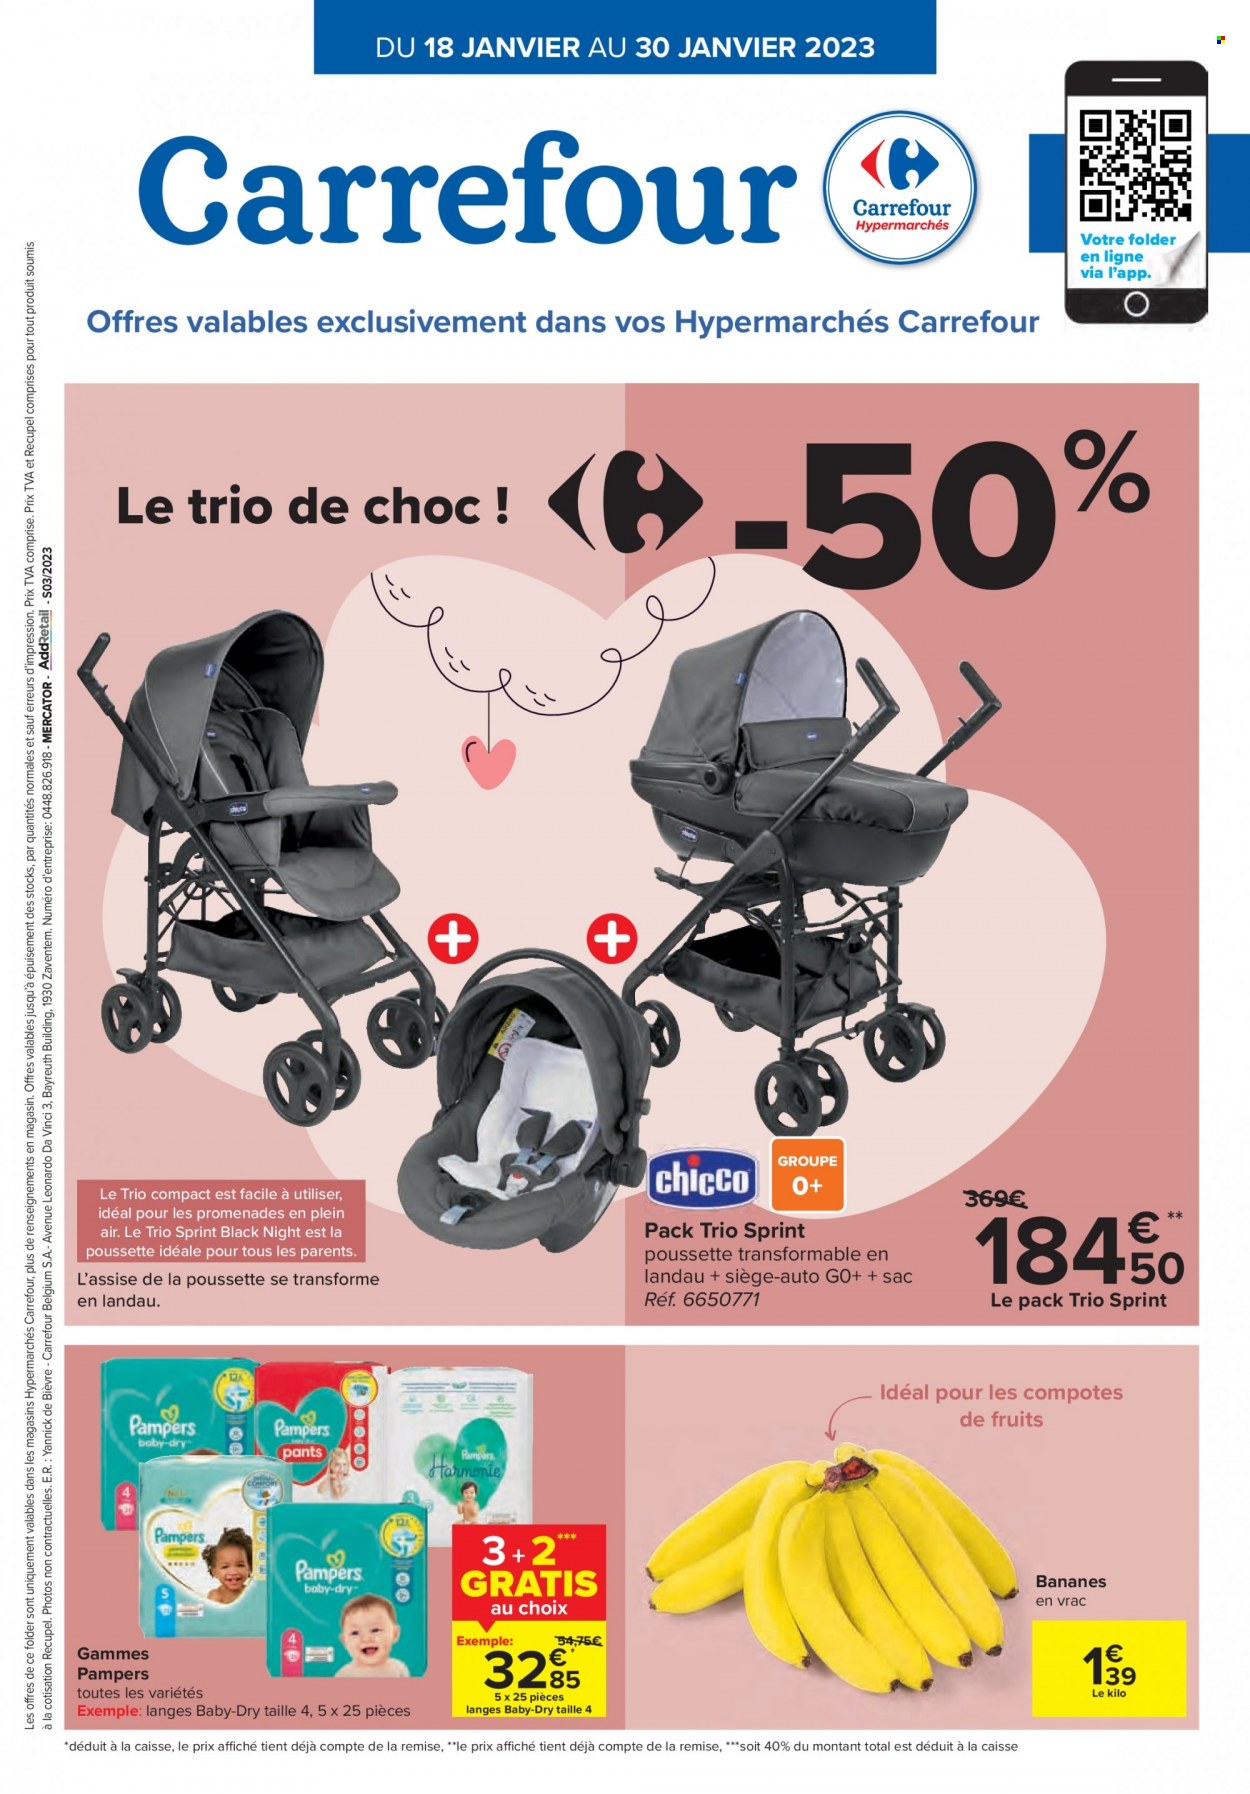 Catalogue Carrefour hypermarkt - 18.1.2023 - 30.1.2023. Page 1.